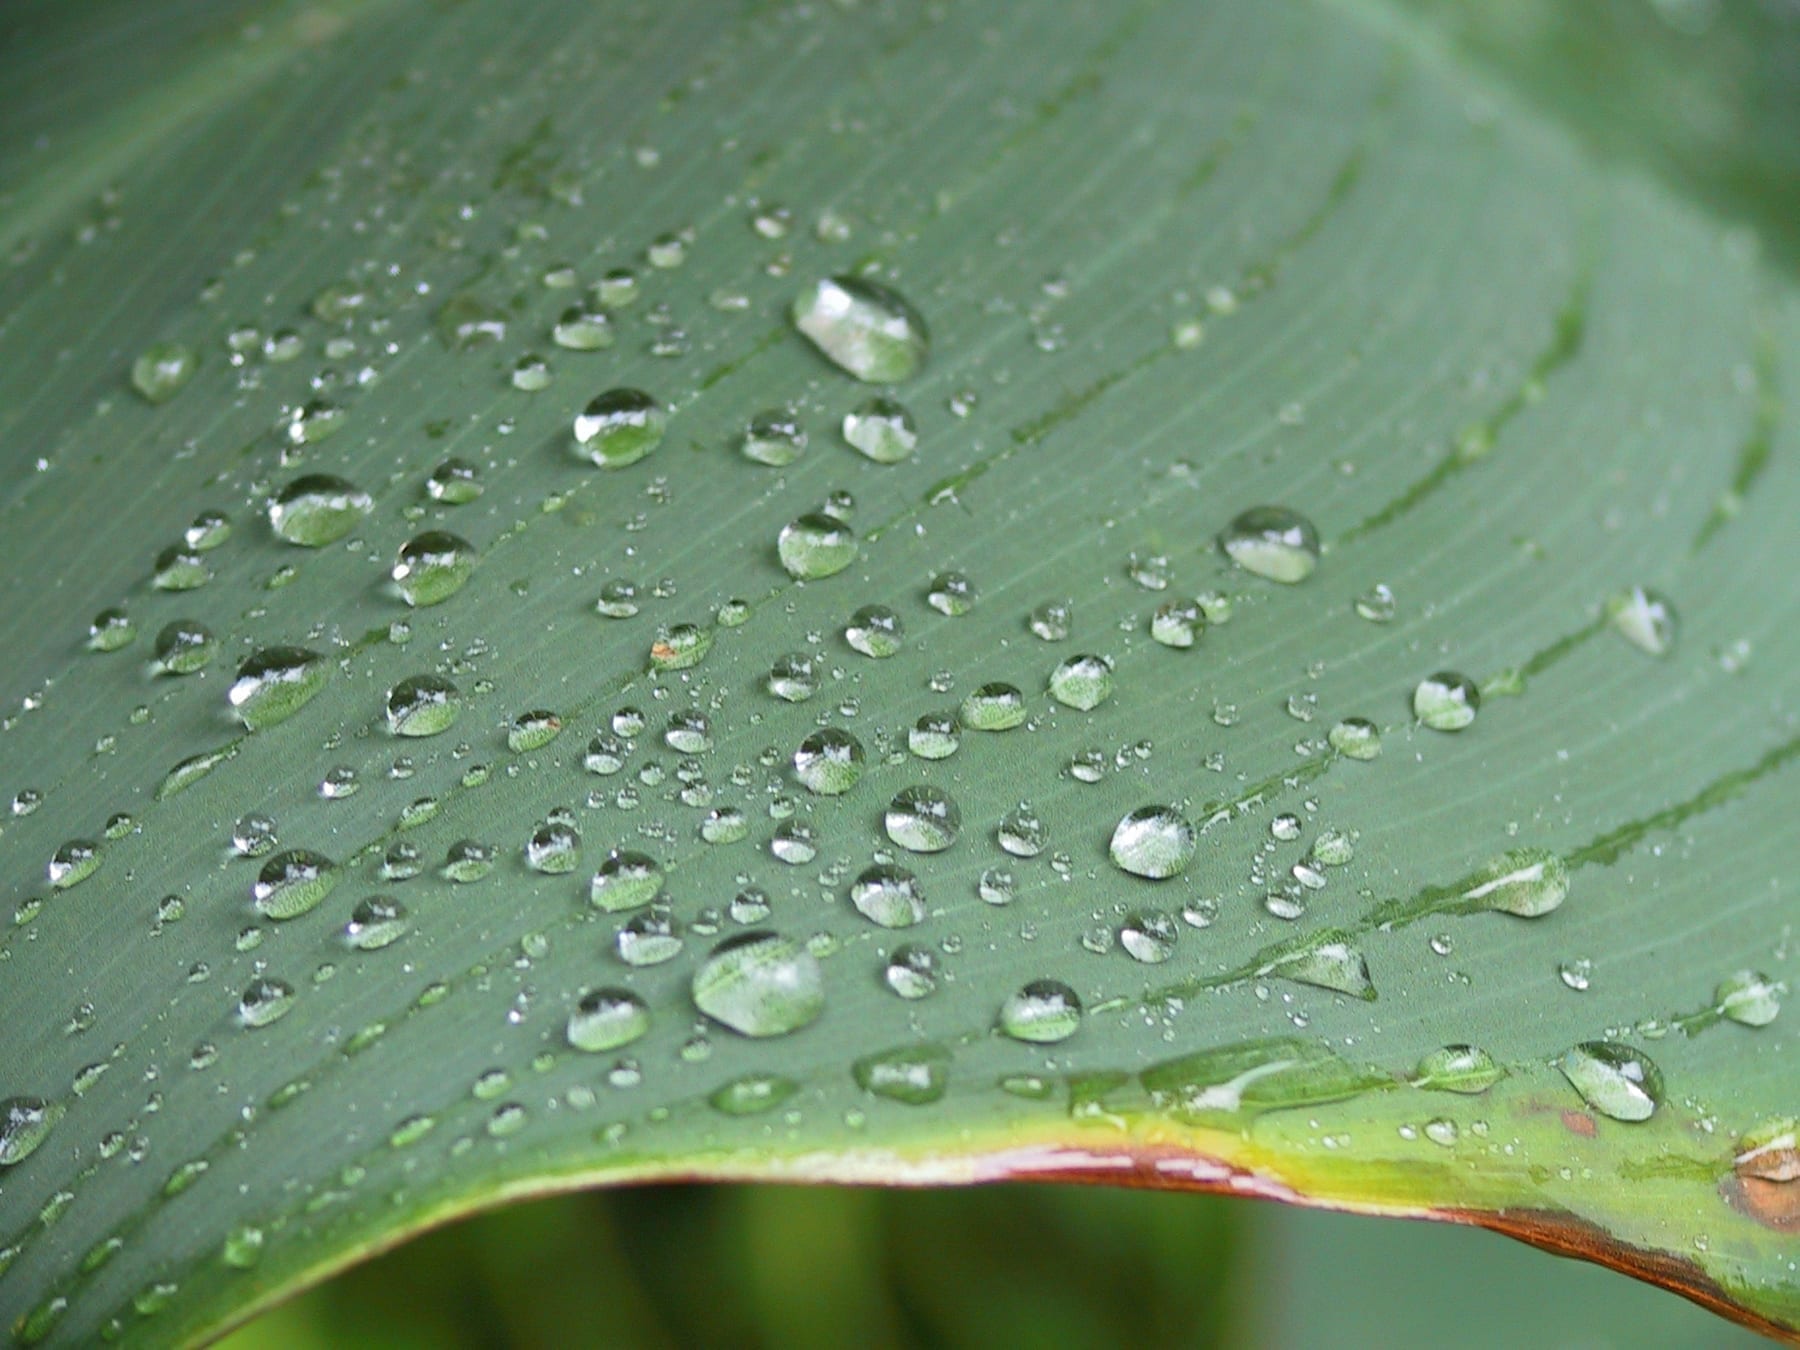 Droplets of water beaded up on a leaf